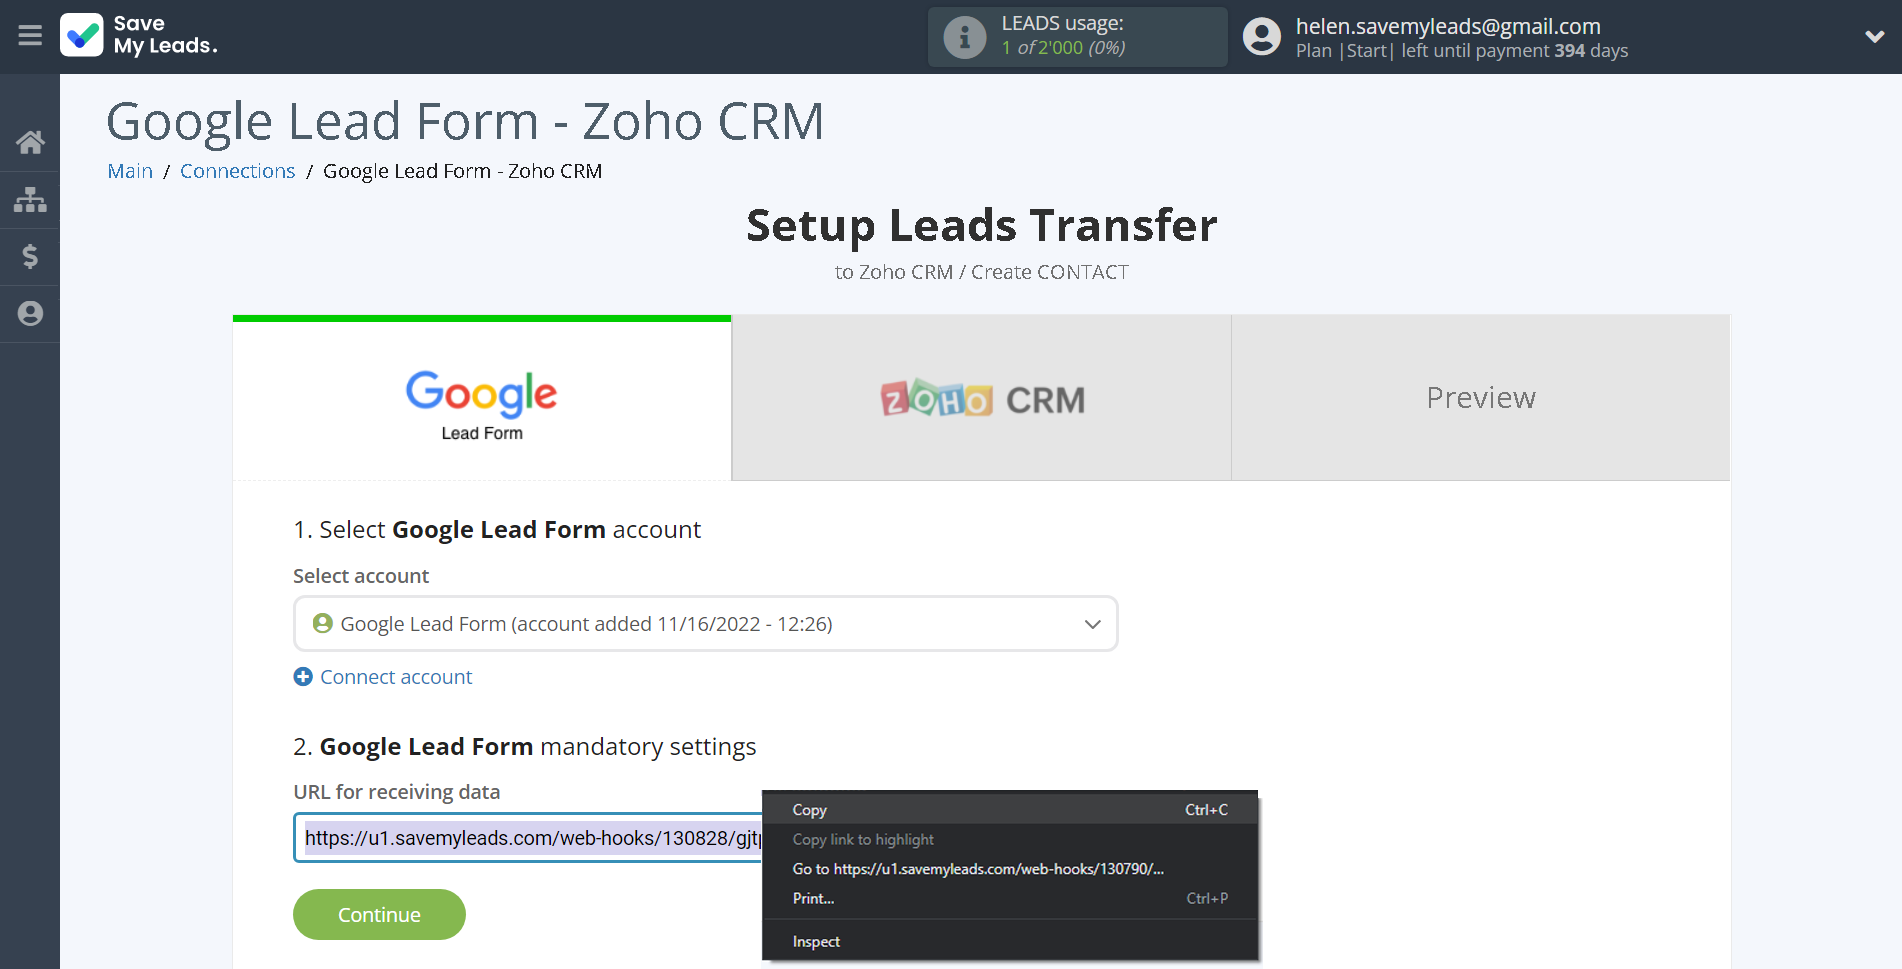 How to Connect Google Lead Form with Zoho CRM Create Contacts | Data Source account connection